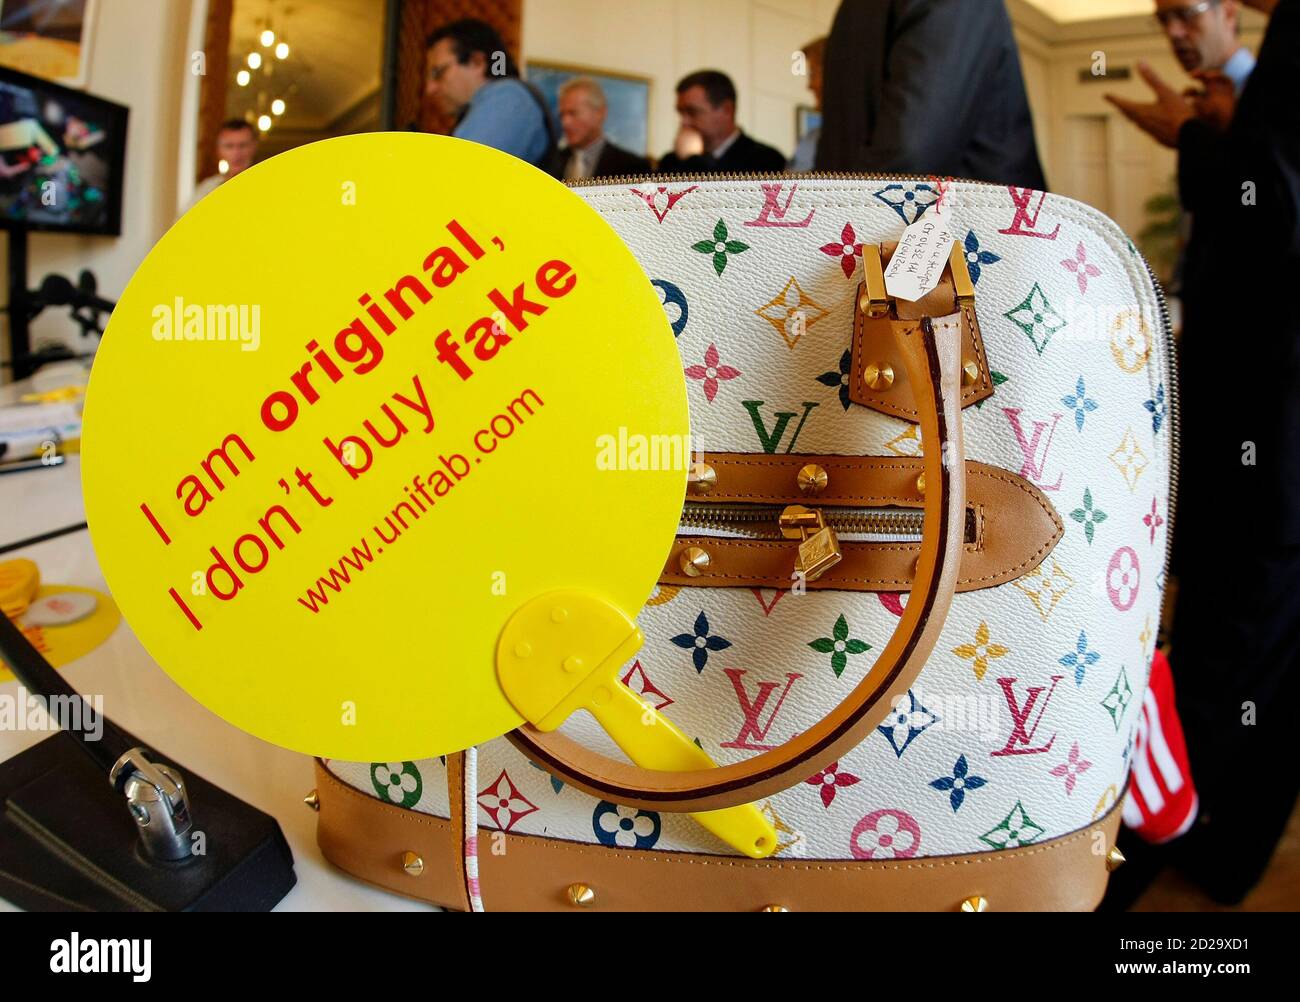 A campaign slogan, 'I am original, I don't buy fake' is displayed on a  counterfeit Louis Vuitton luxury handbag by French Customs officers before  a destruction operation in Cannes, southeastern France September